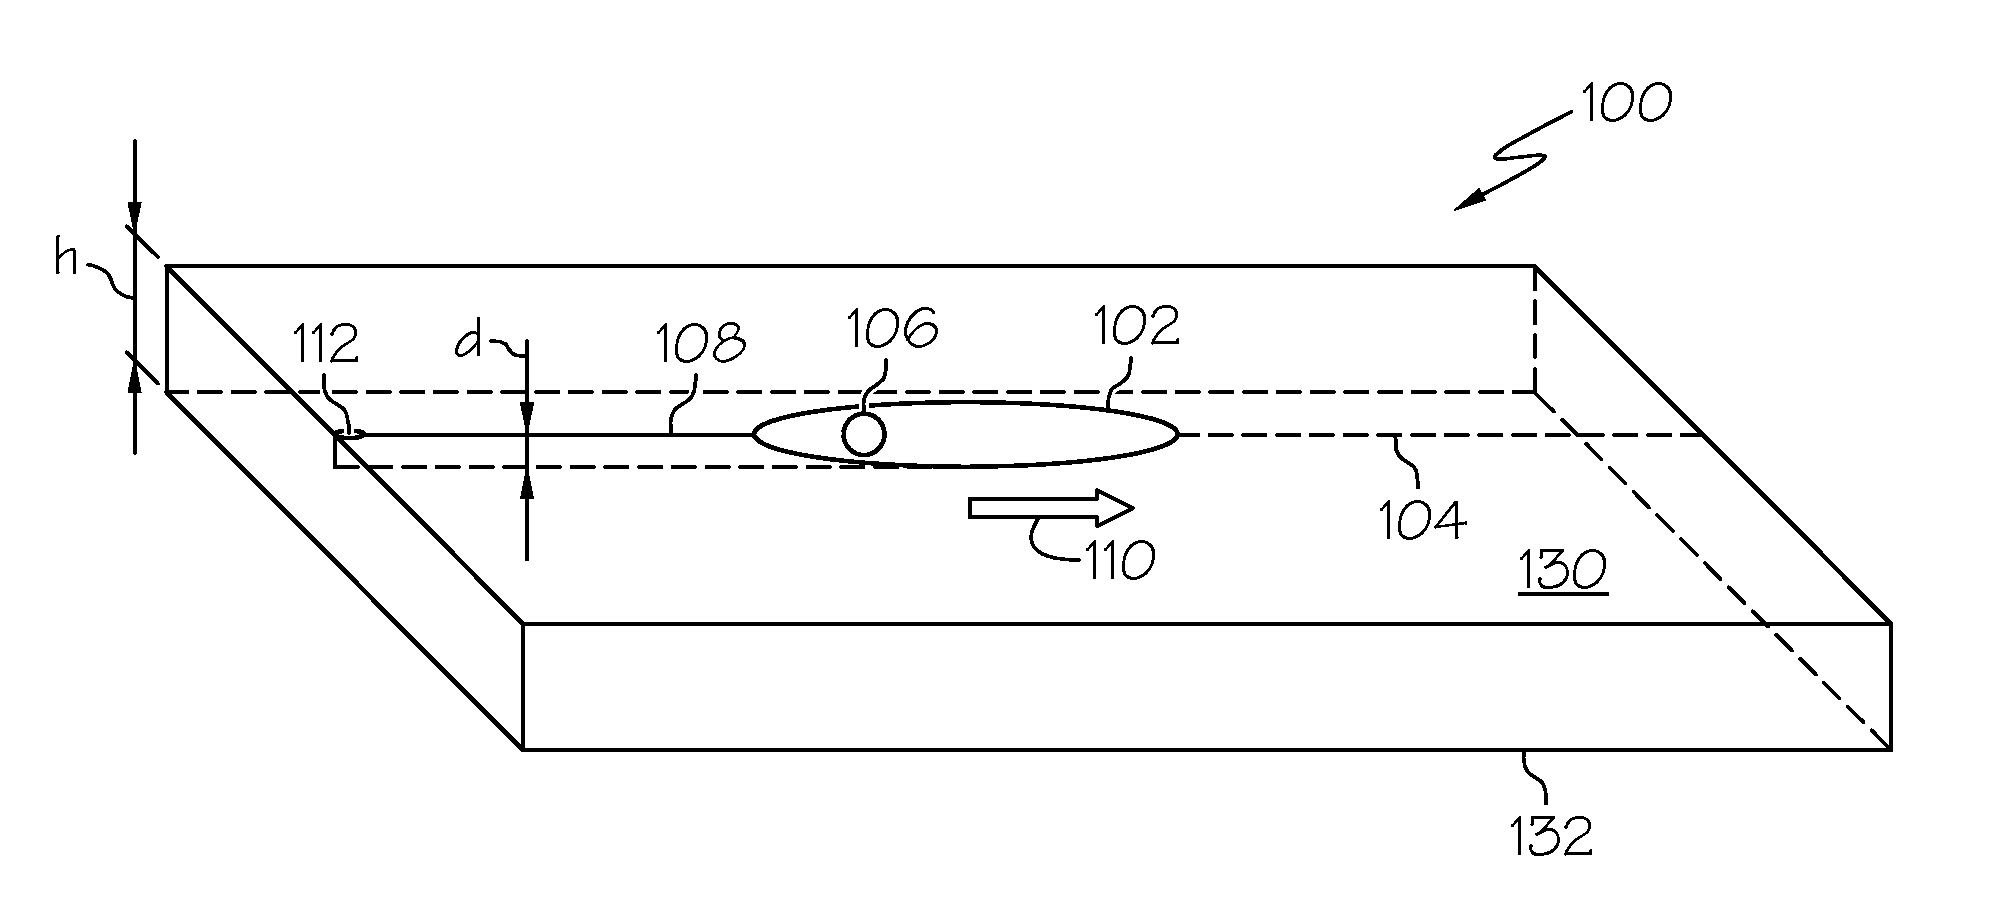 Methods for laser scribing and breaking thin glass